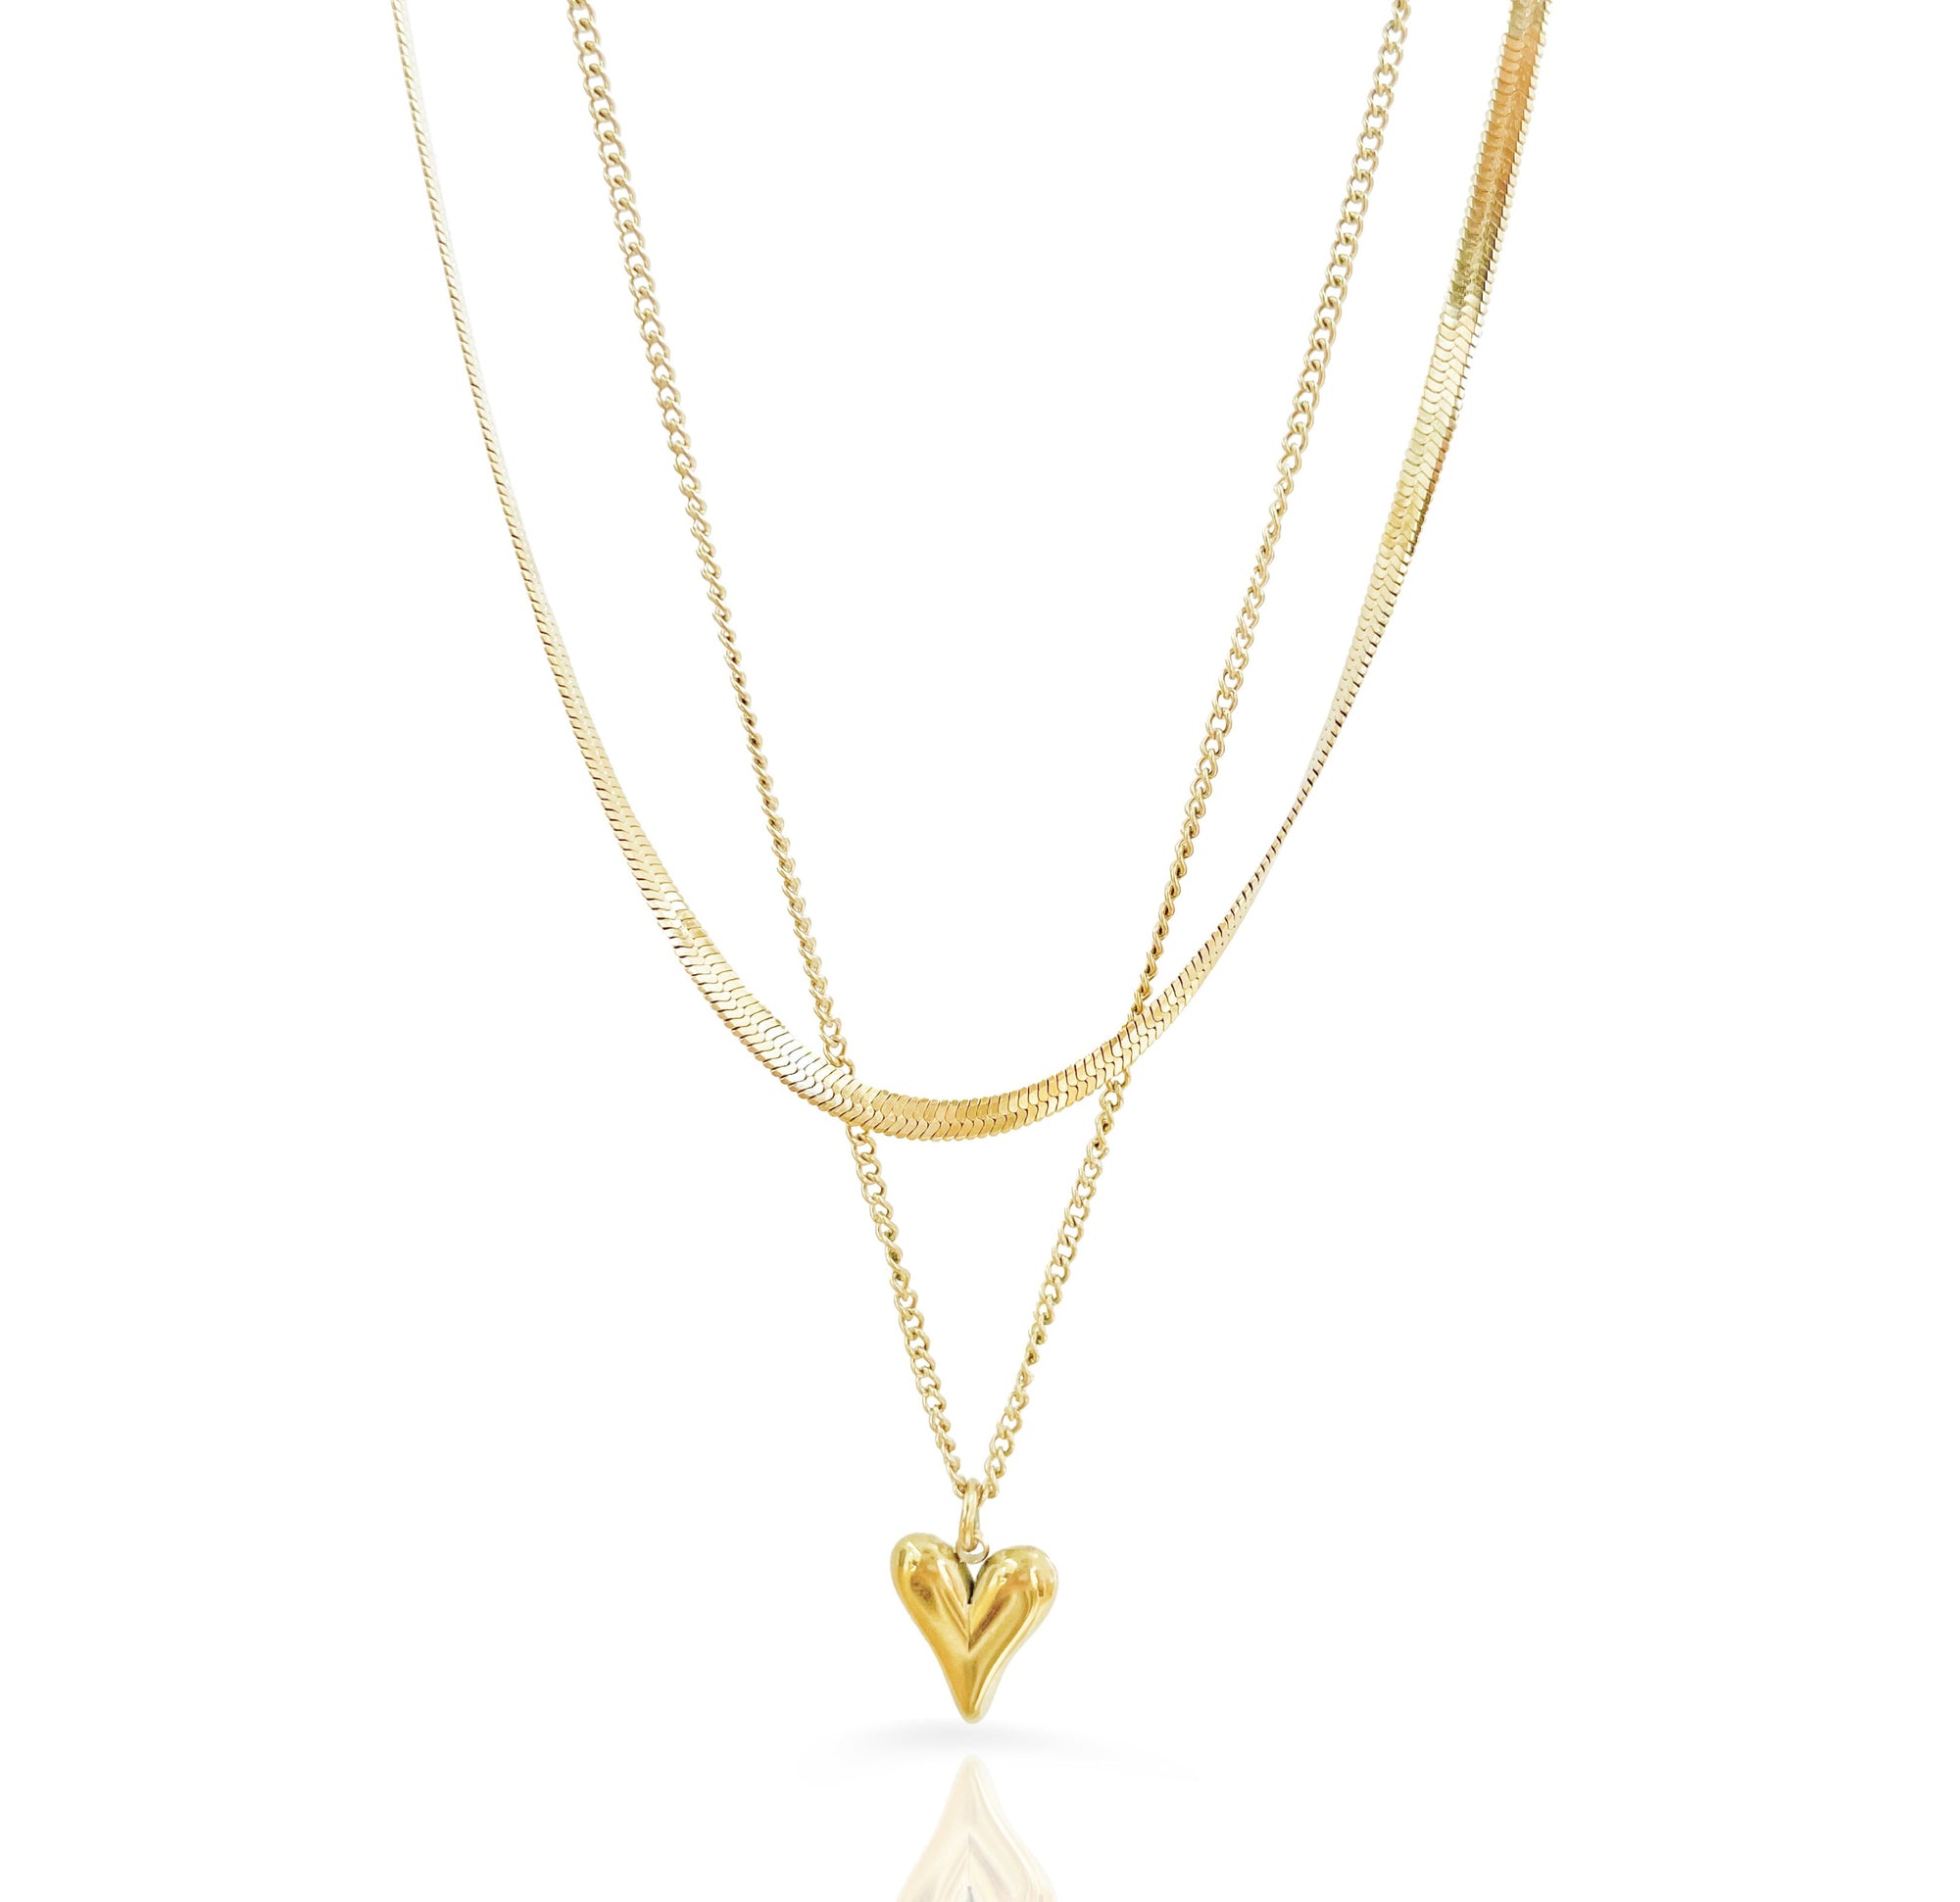 gold heart pendant stack necklace waterproof jewelry